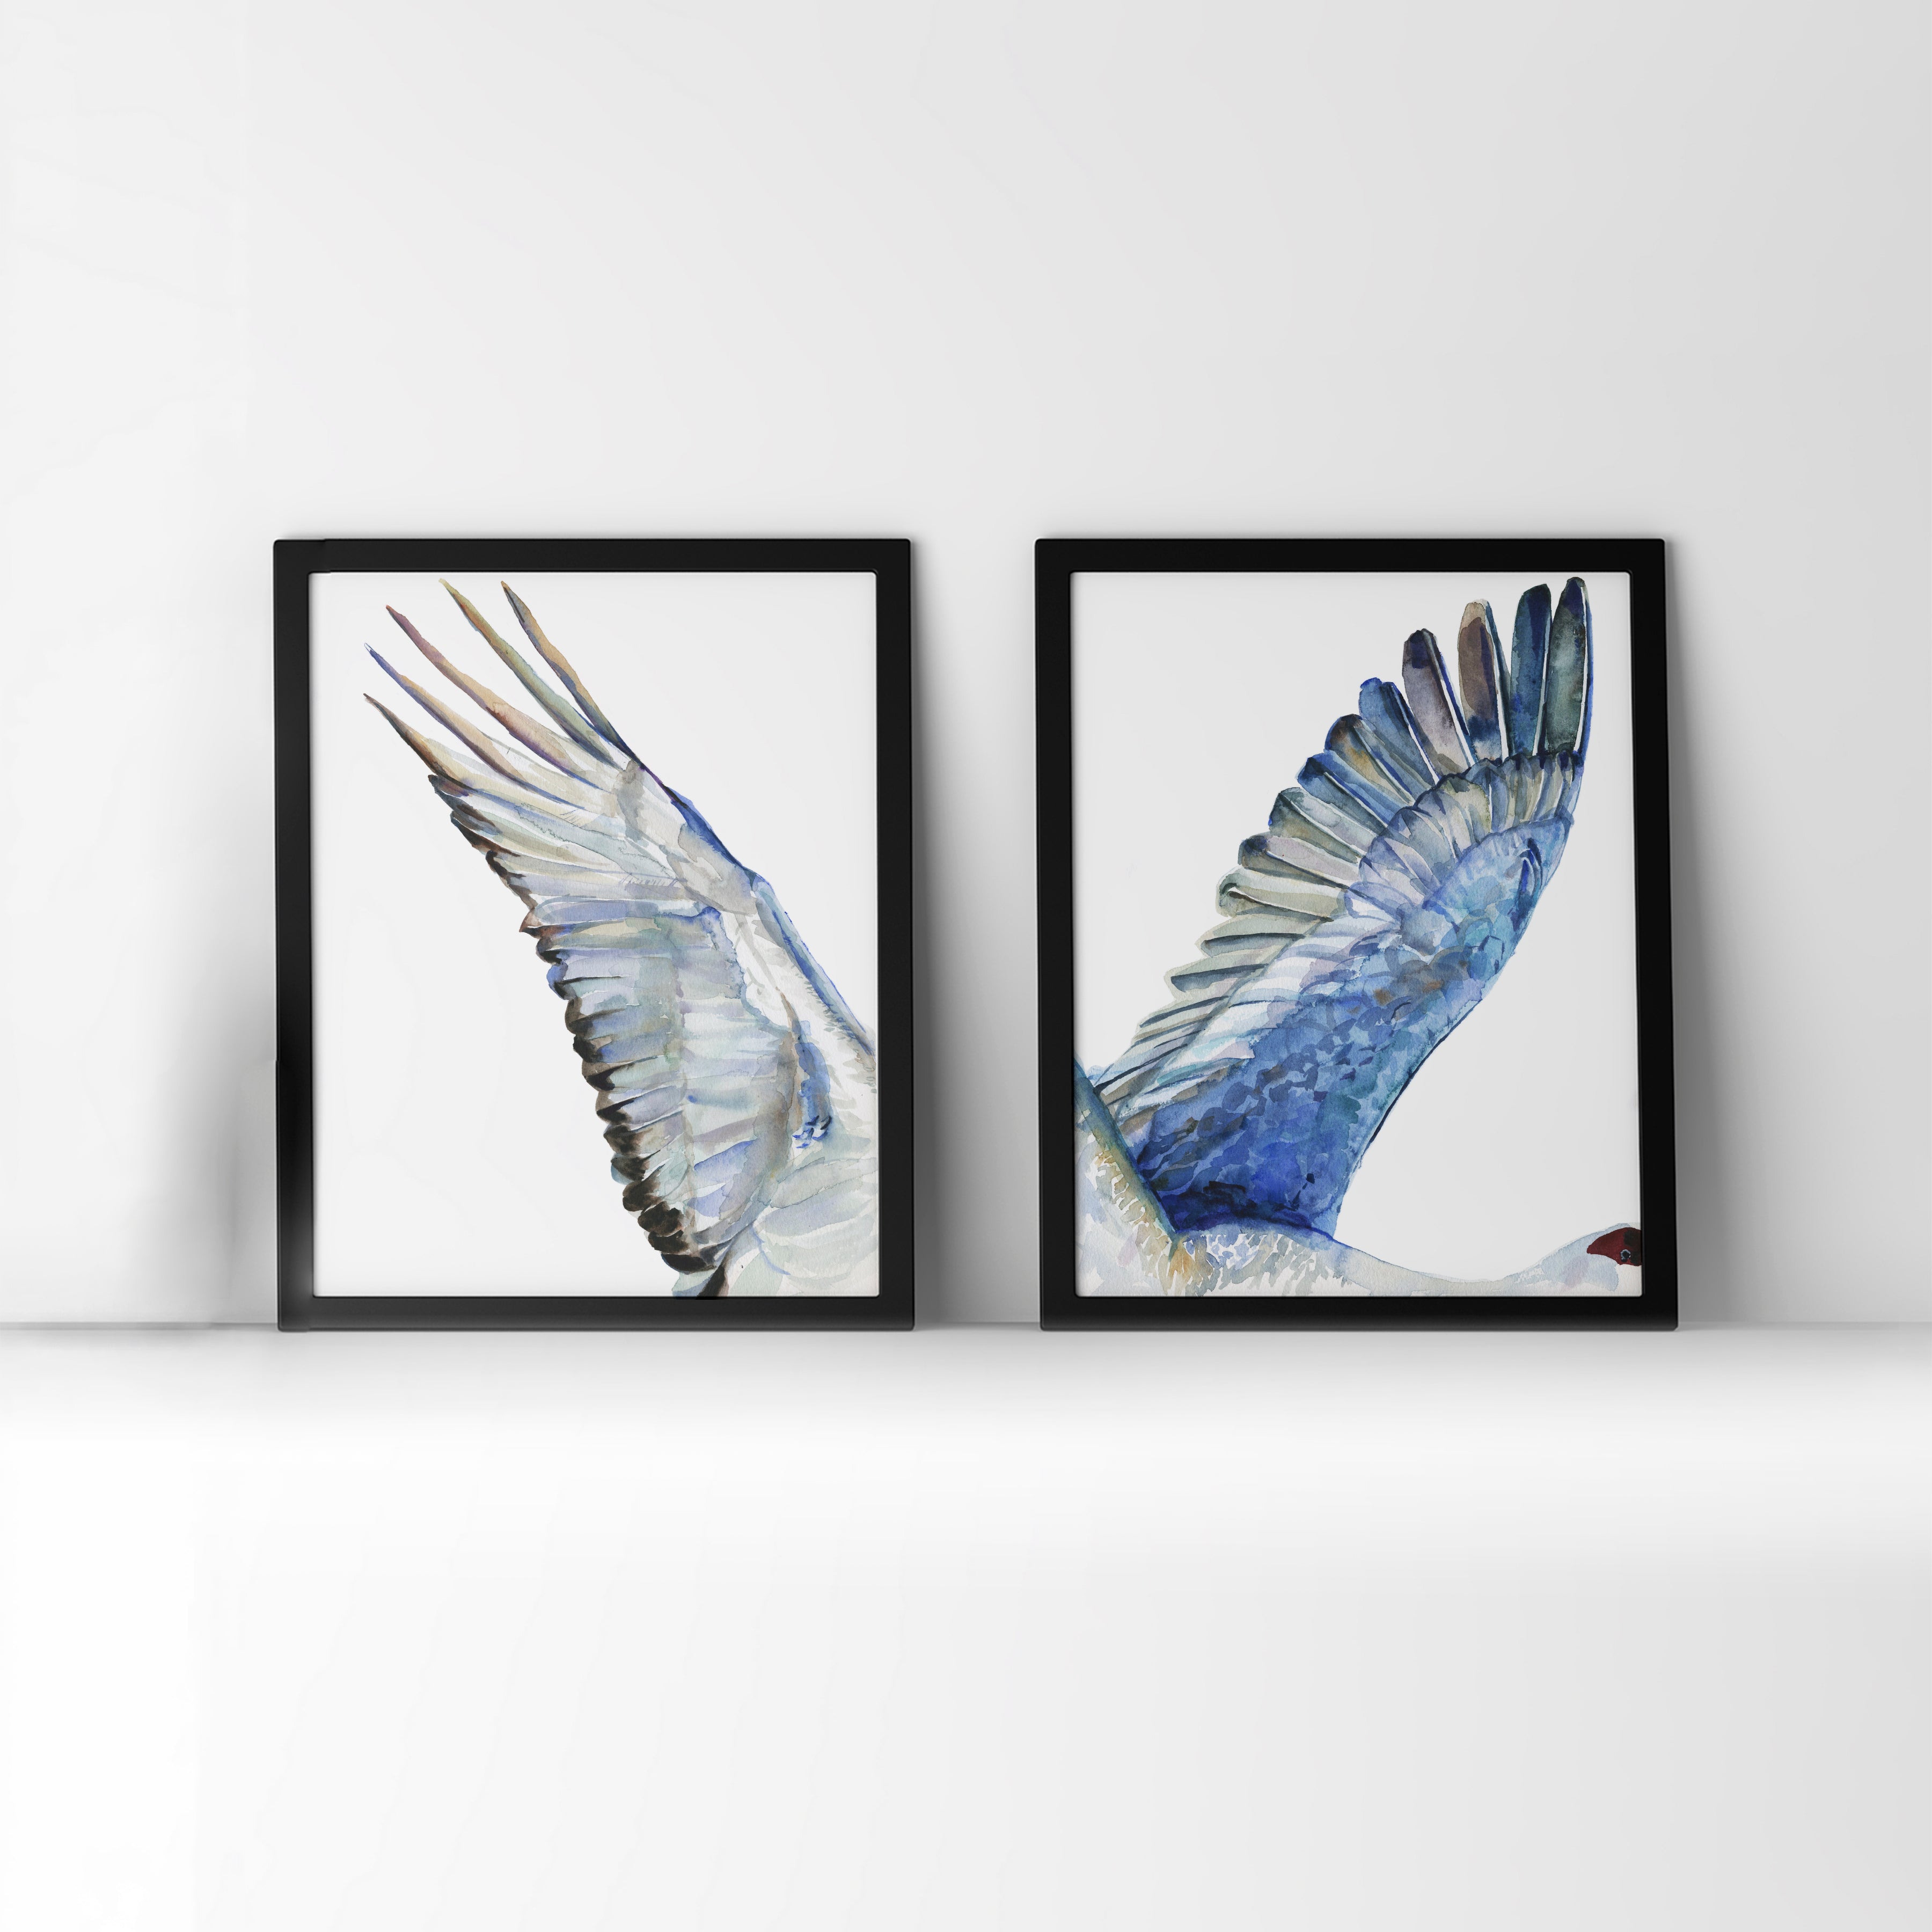 Framed watercolor diptych of a crane's wings.